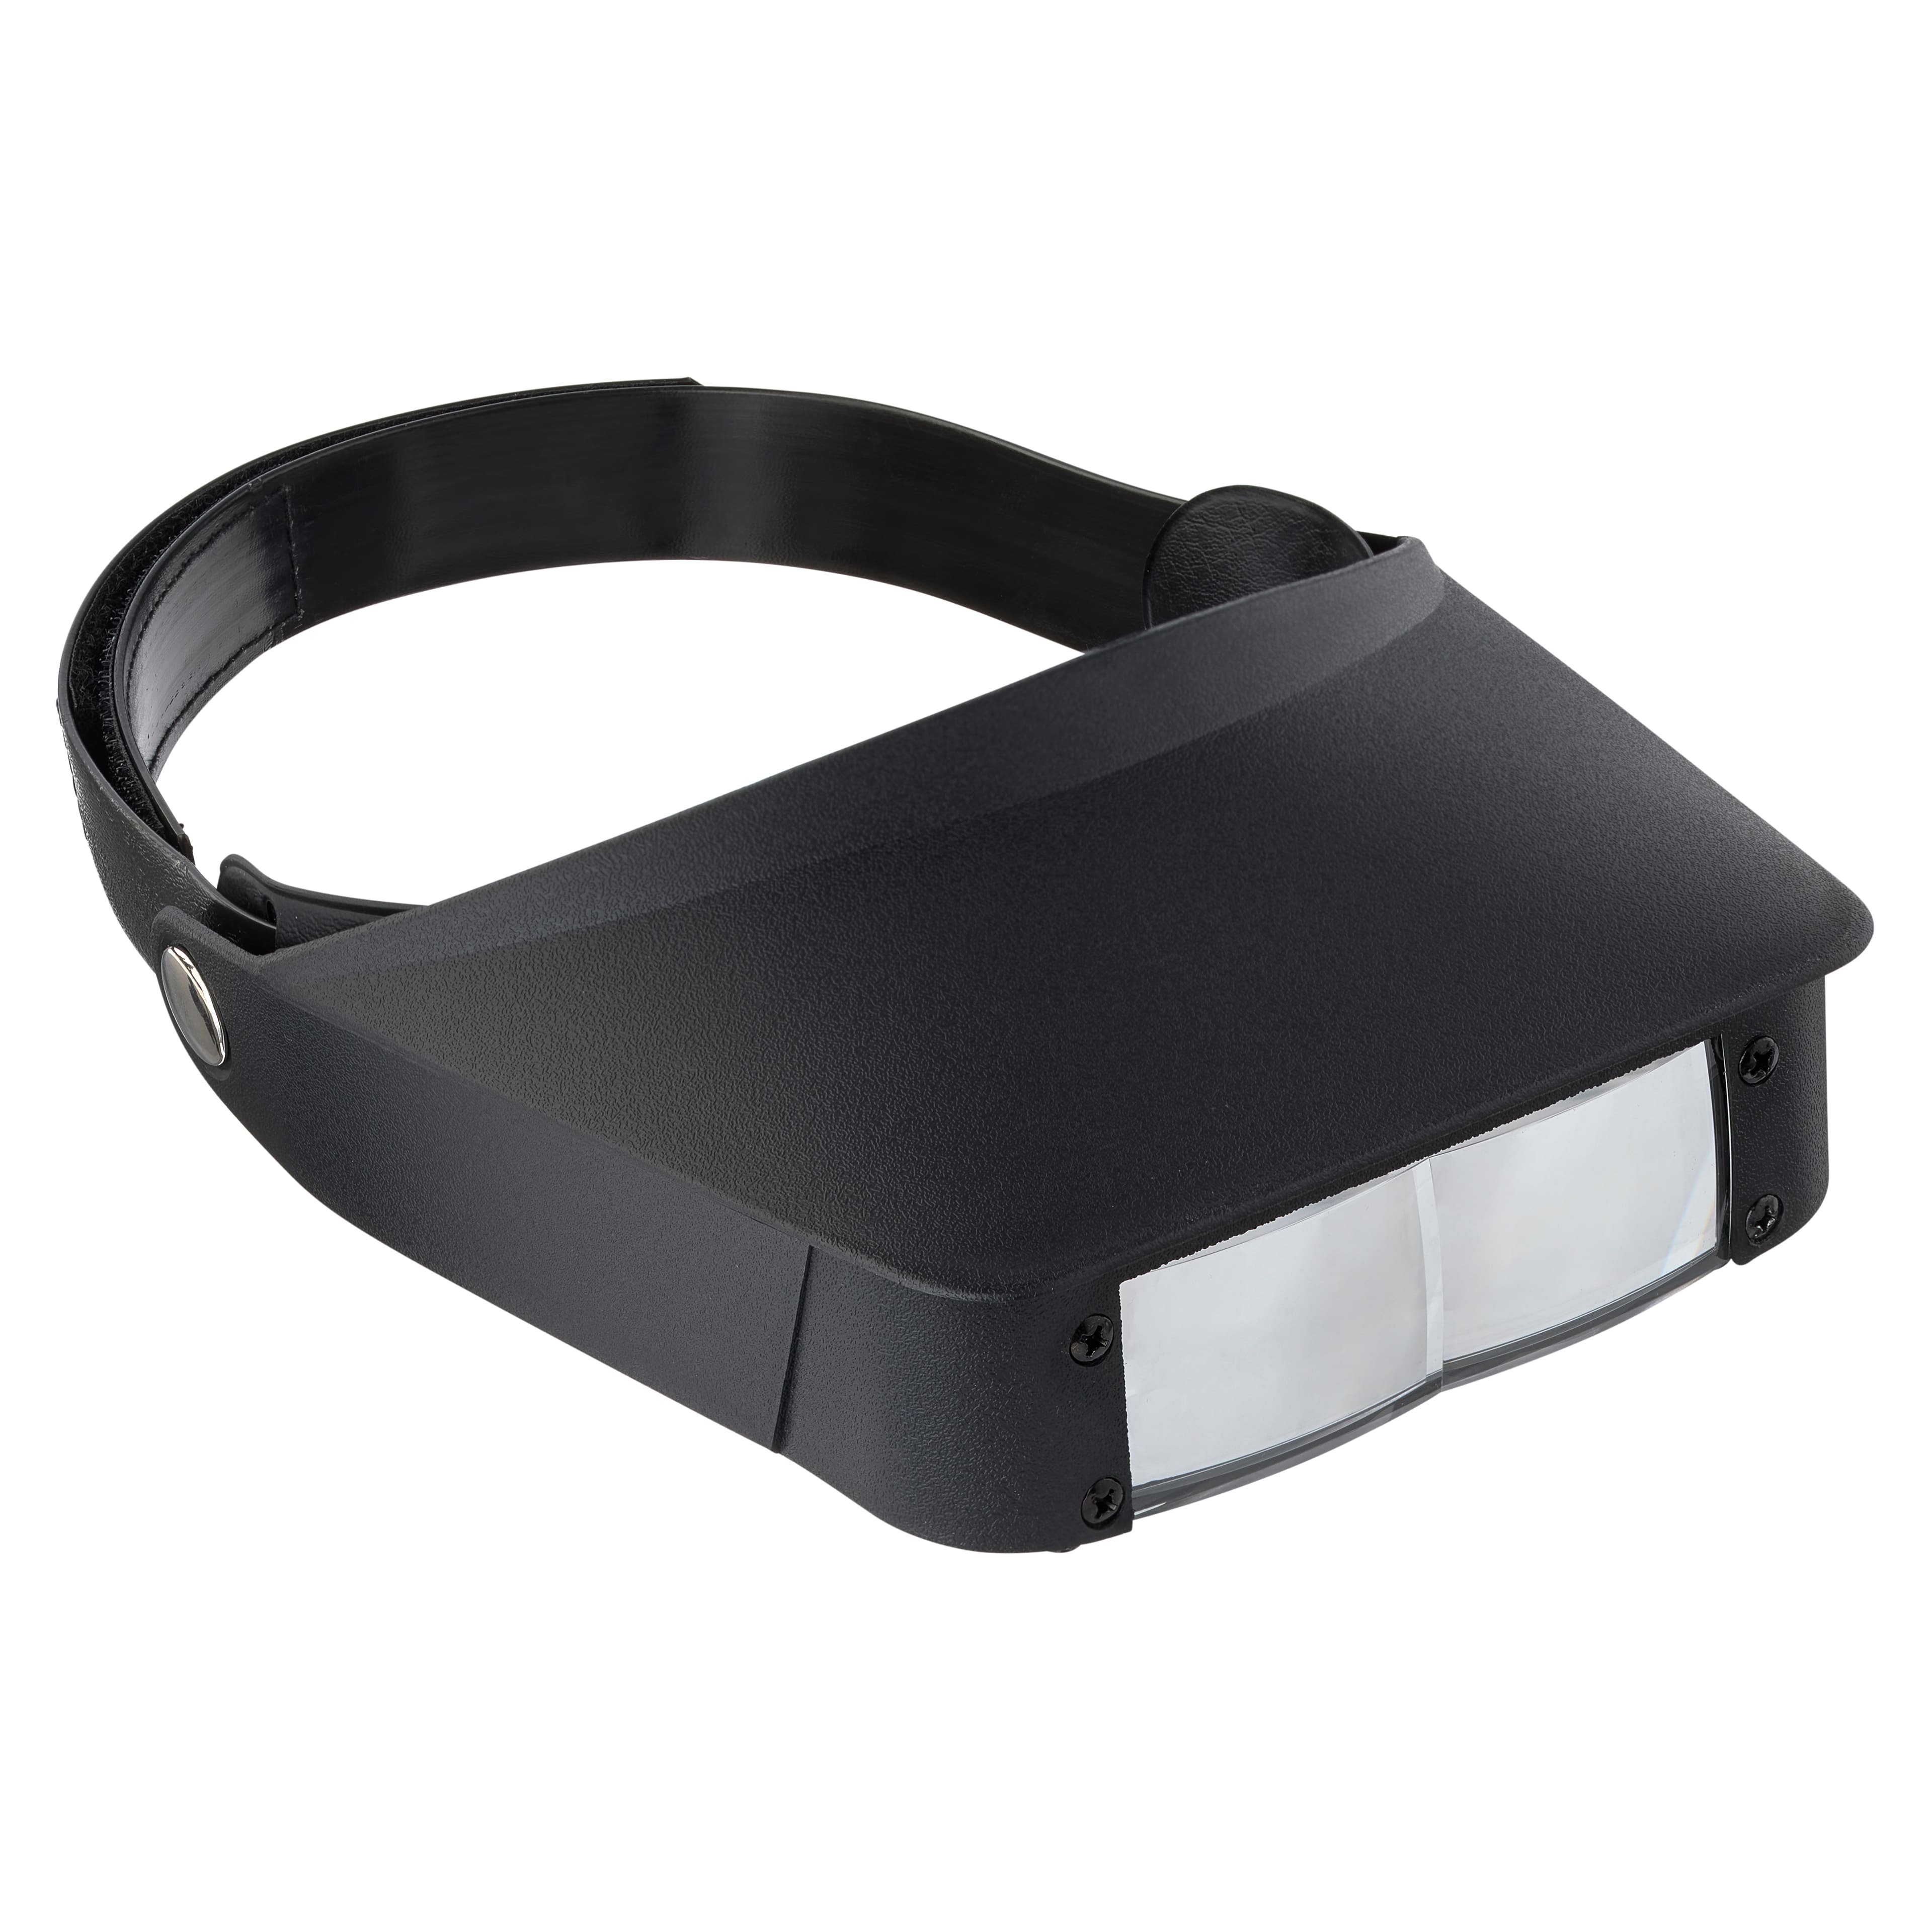 Magnifier Visor by Loops & Threads®